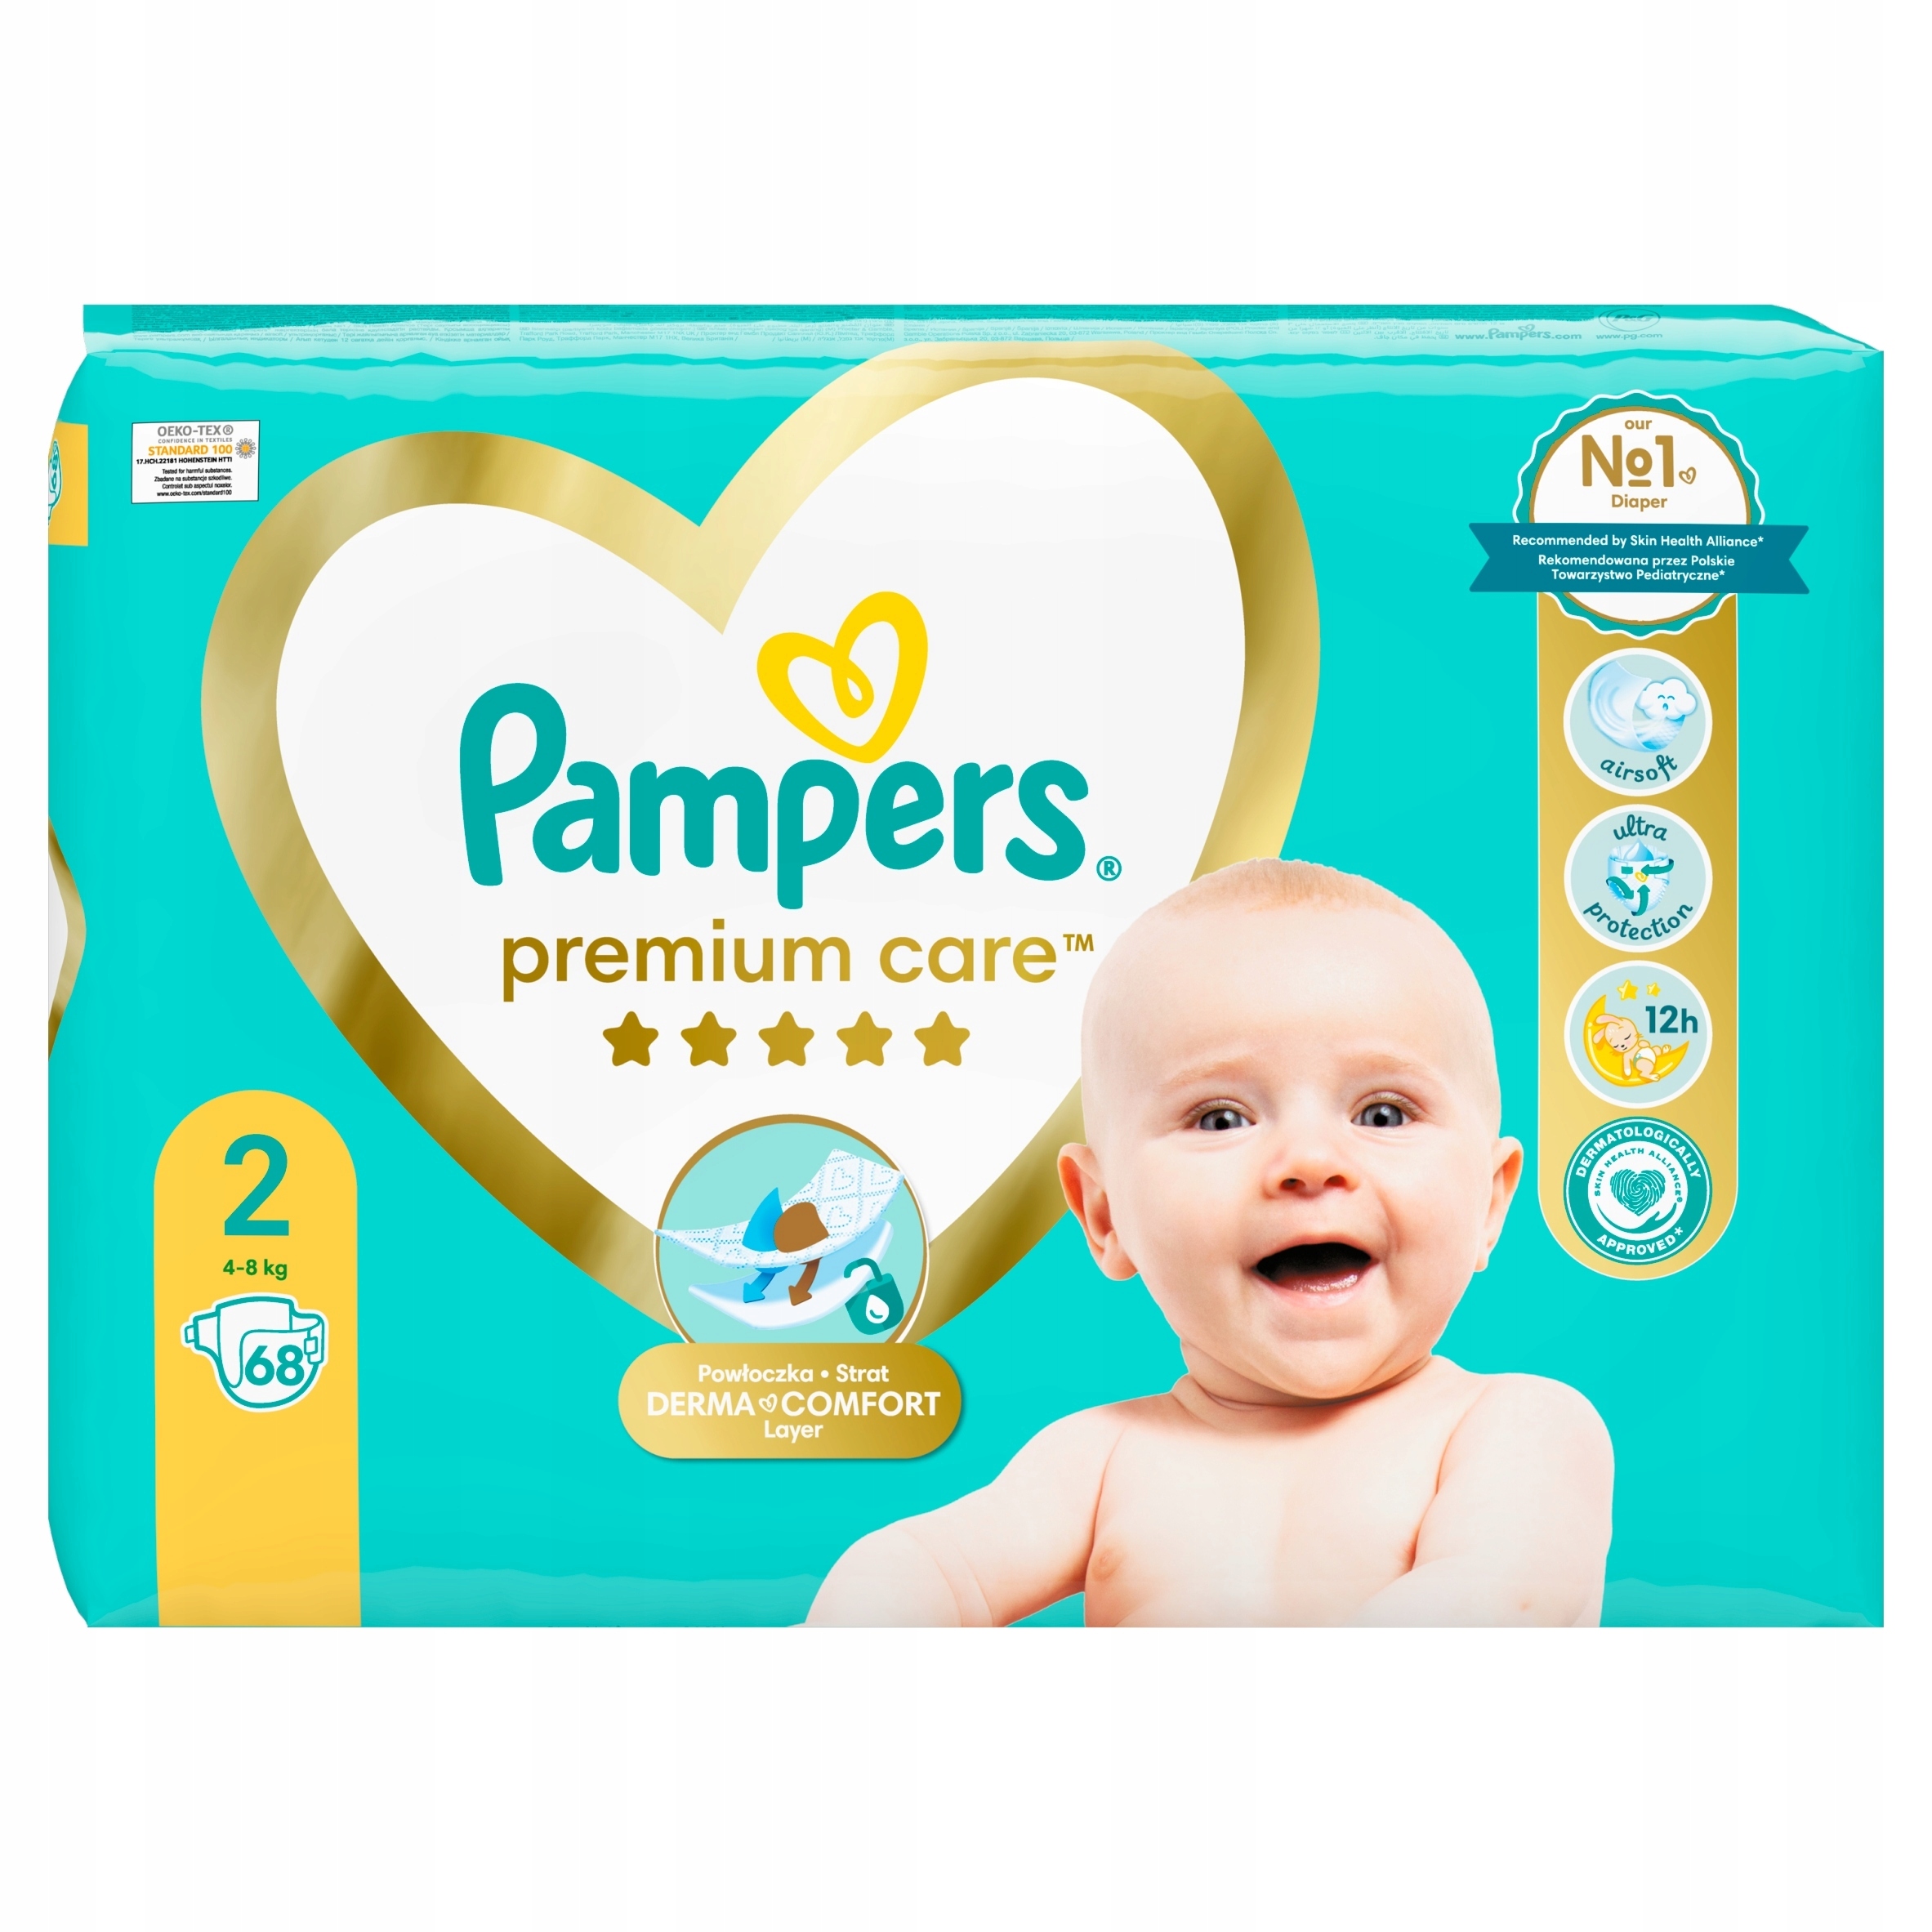 pampers active baby 5 54 szt